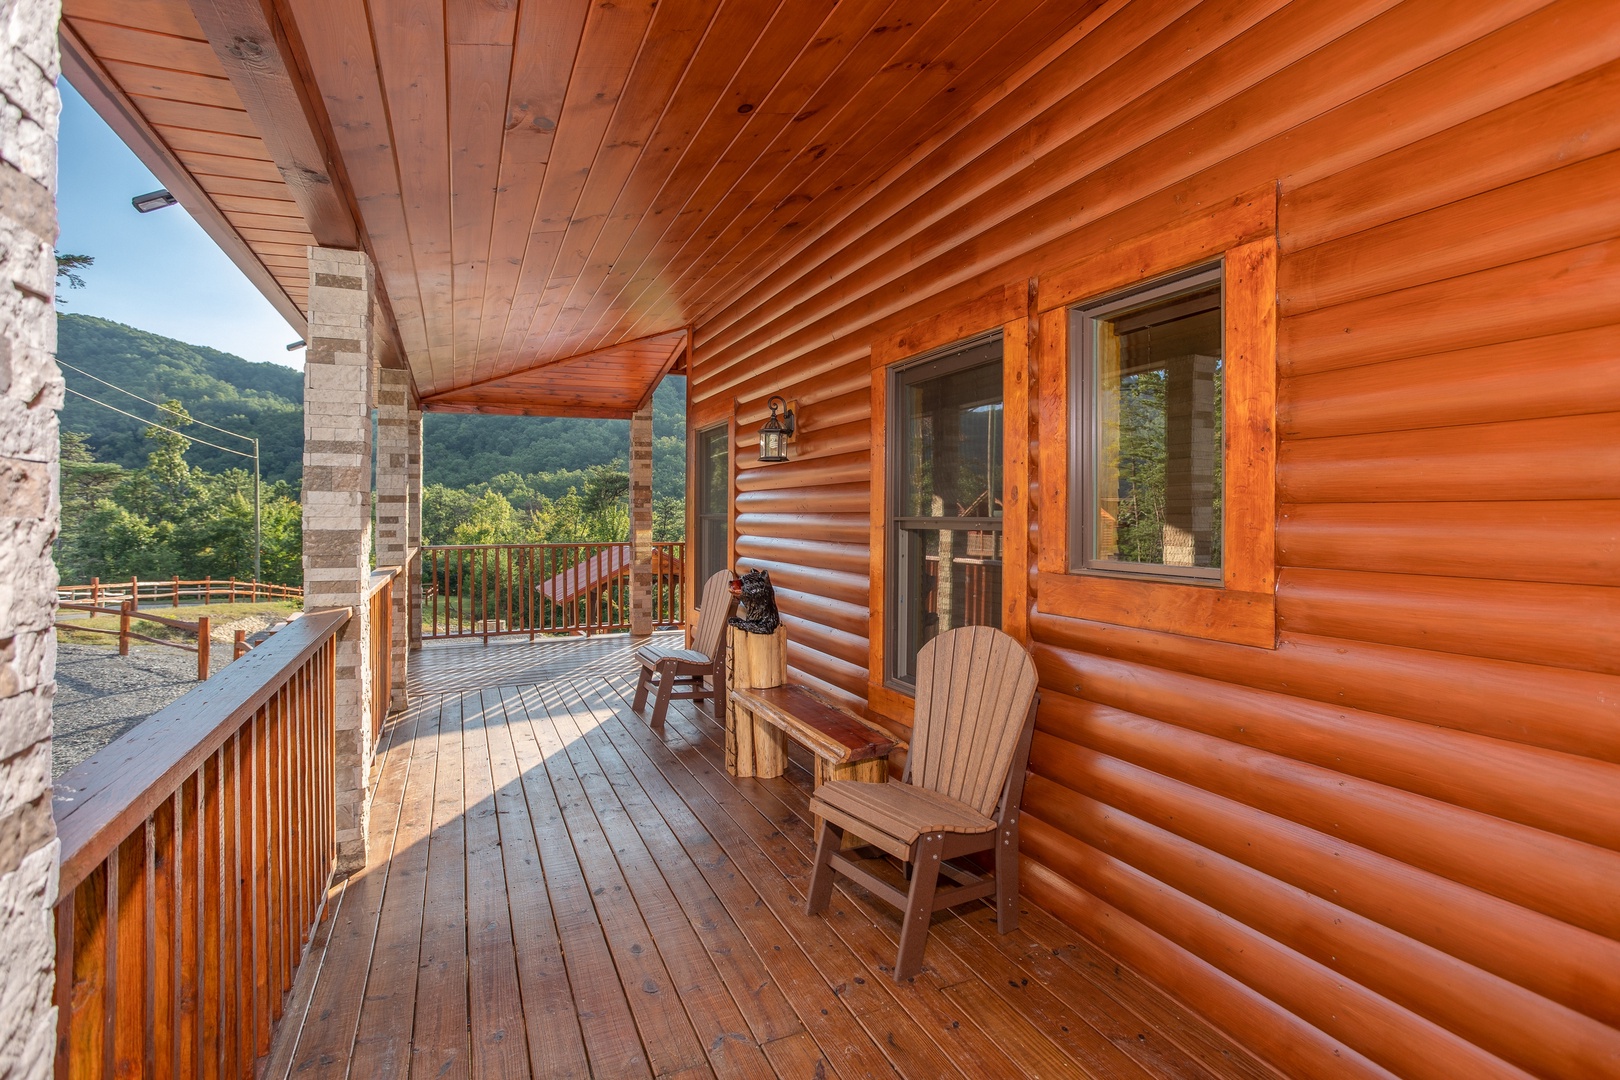 Porch with two chairs and a bench at Four Seasons Palace, a 5-bedroom cabin rental located in Pigeon Forge